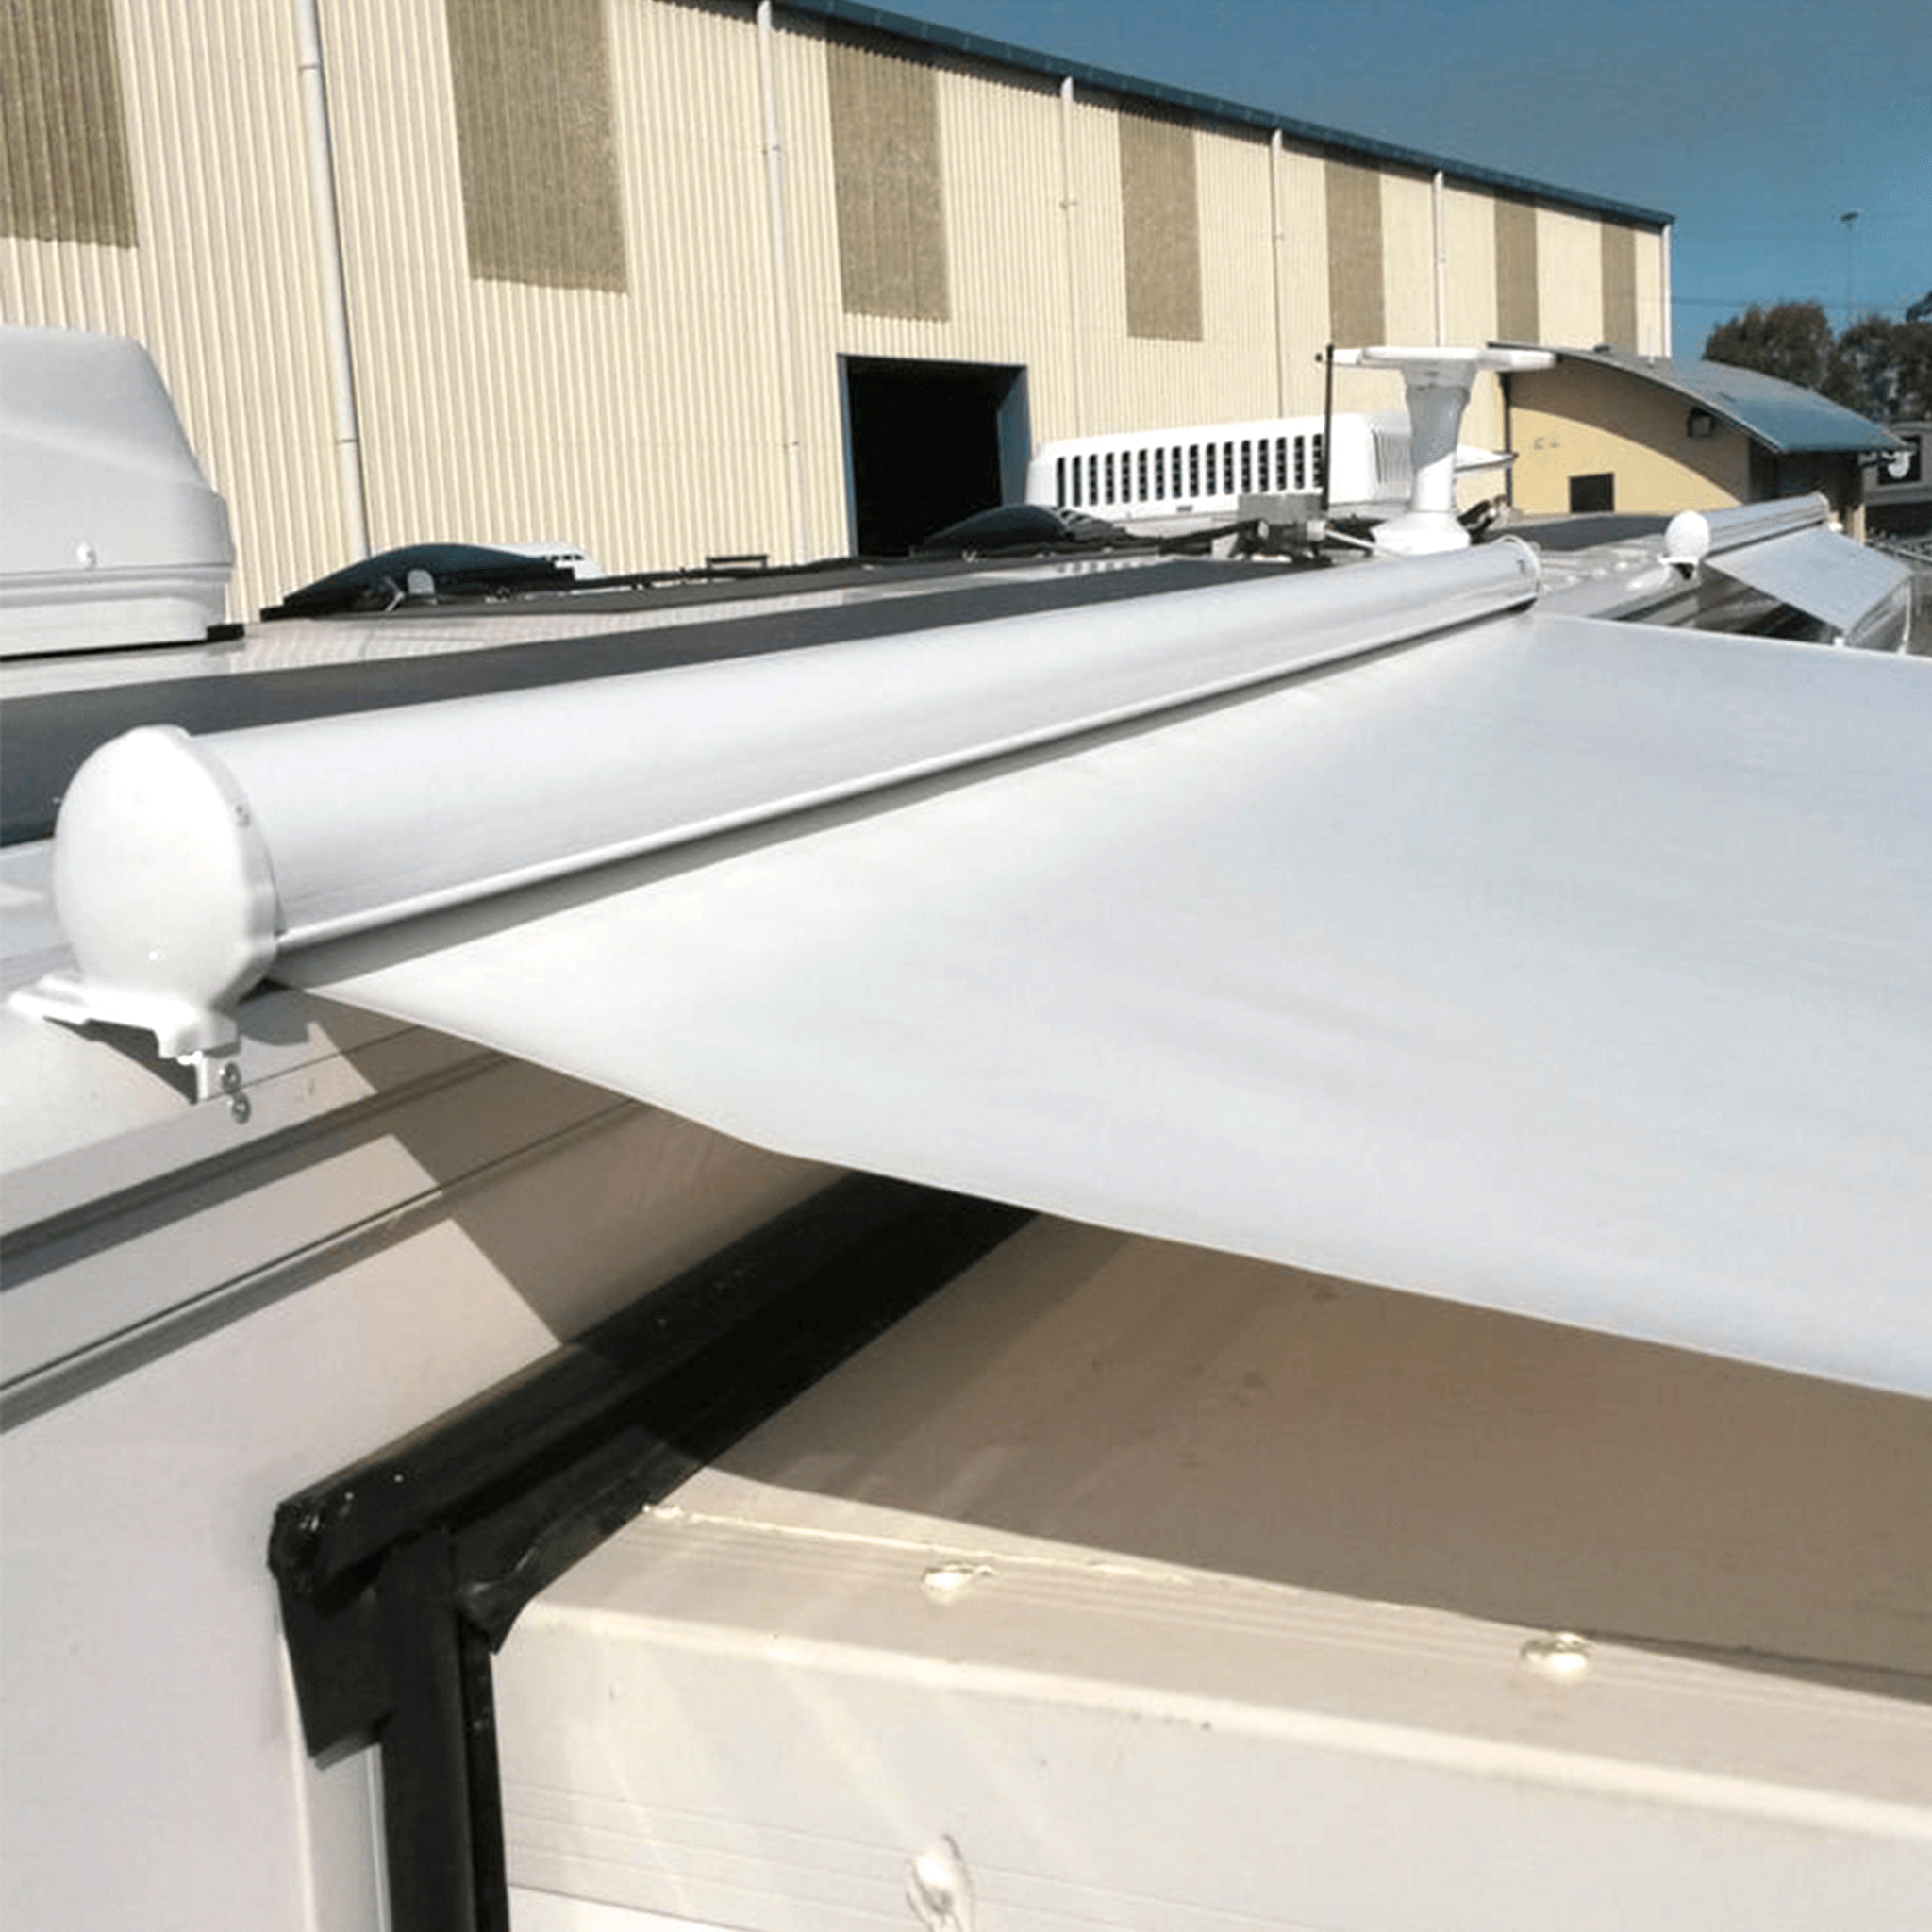 Slide-out Awning - Aussie Traveller